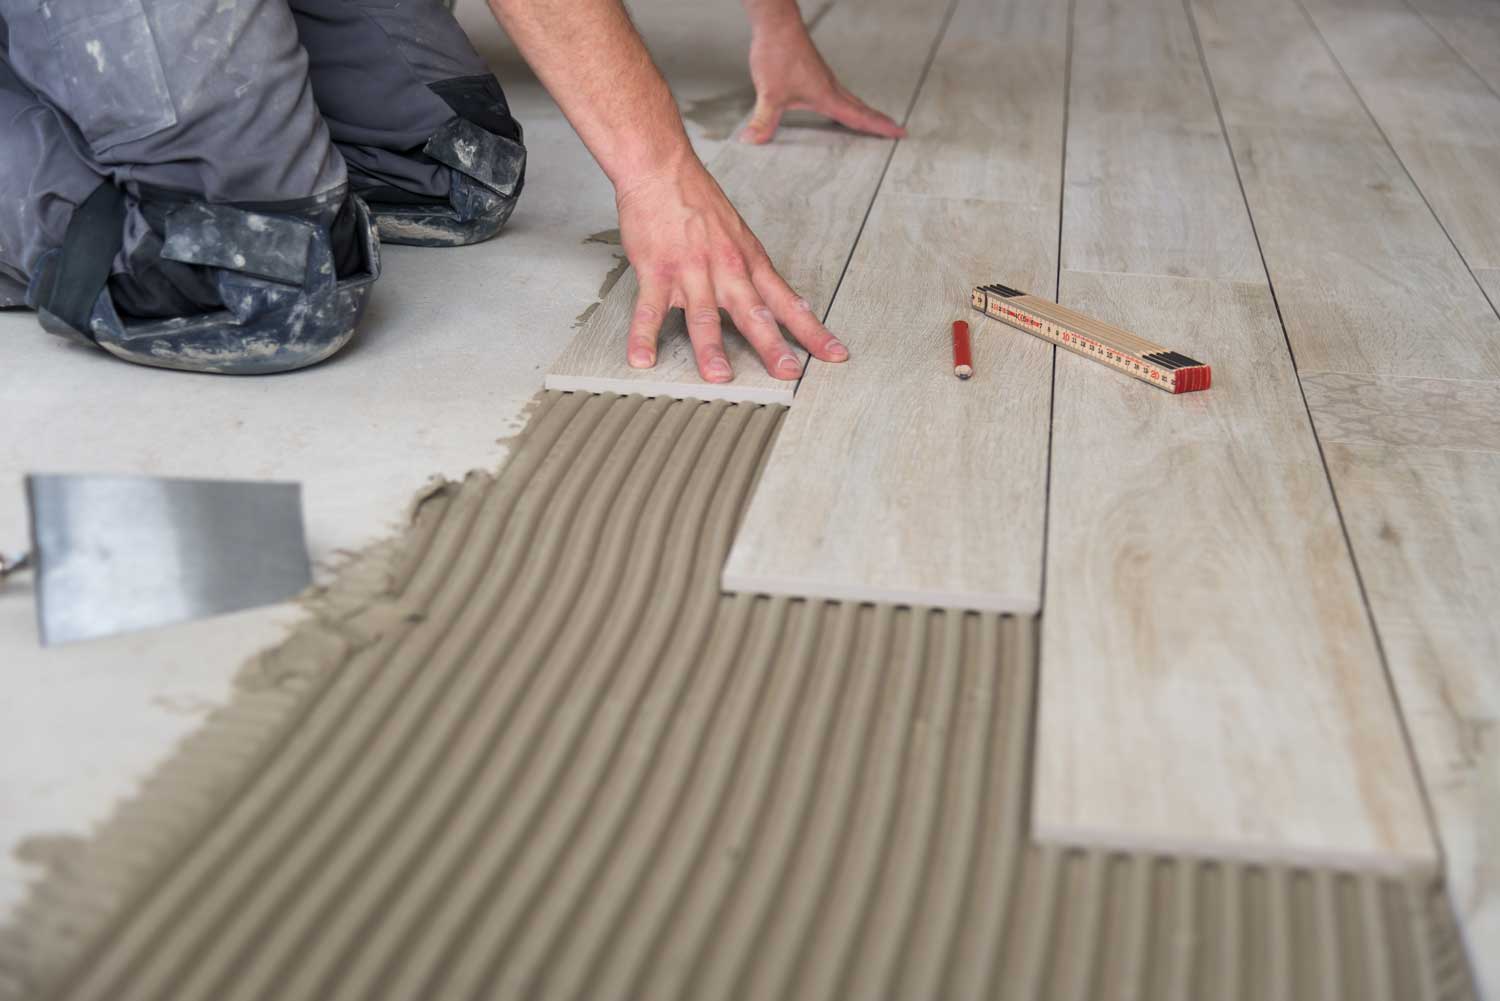 At Footprints Floors, our tile contractors in Richmond get the job done - just read the reviews!